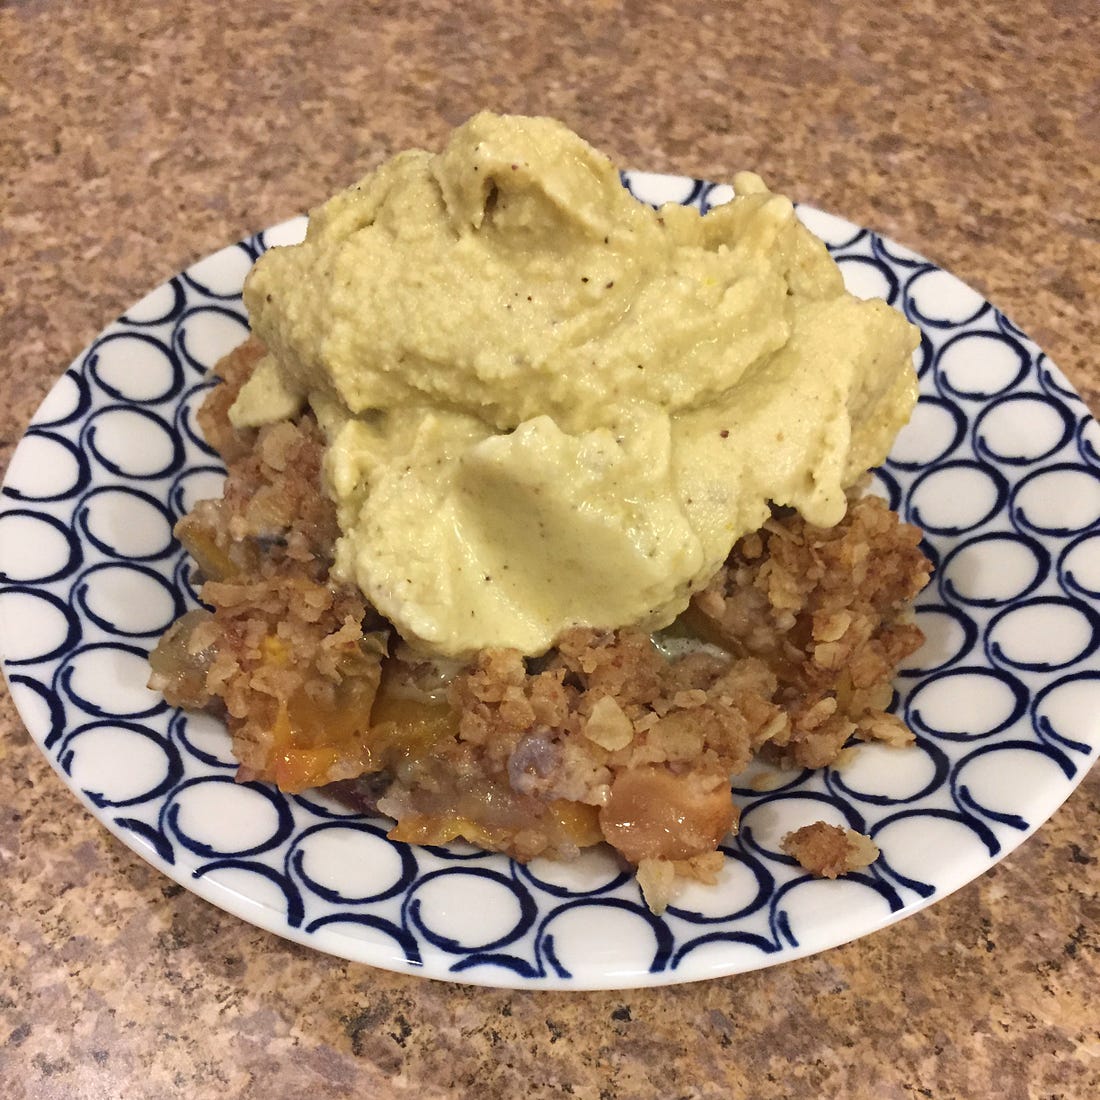 on a blue and white patterned plate, a mess of peach and apple cobbler with a soft-looking scoop of pistachio ice cream on top.